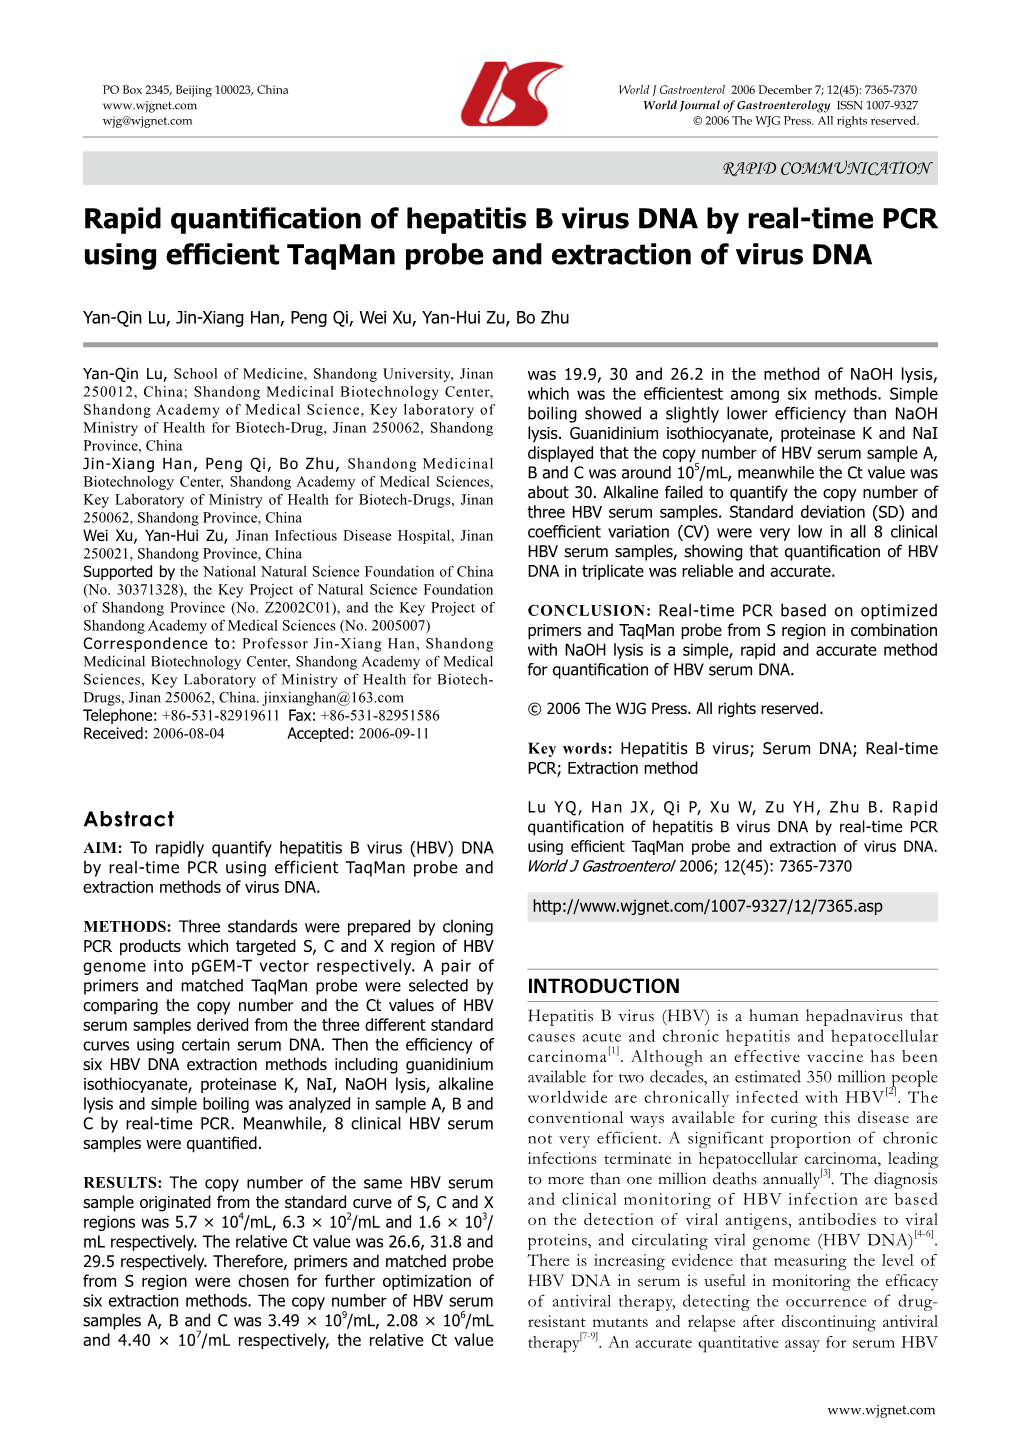 Rapid Quantification of Hepatitis B Virus DNA by Real-Time PCR Using Efficient Taqman Probe and Extraction of Virus DNA